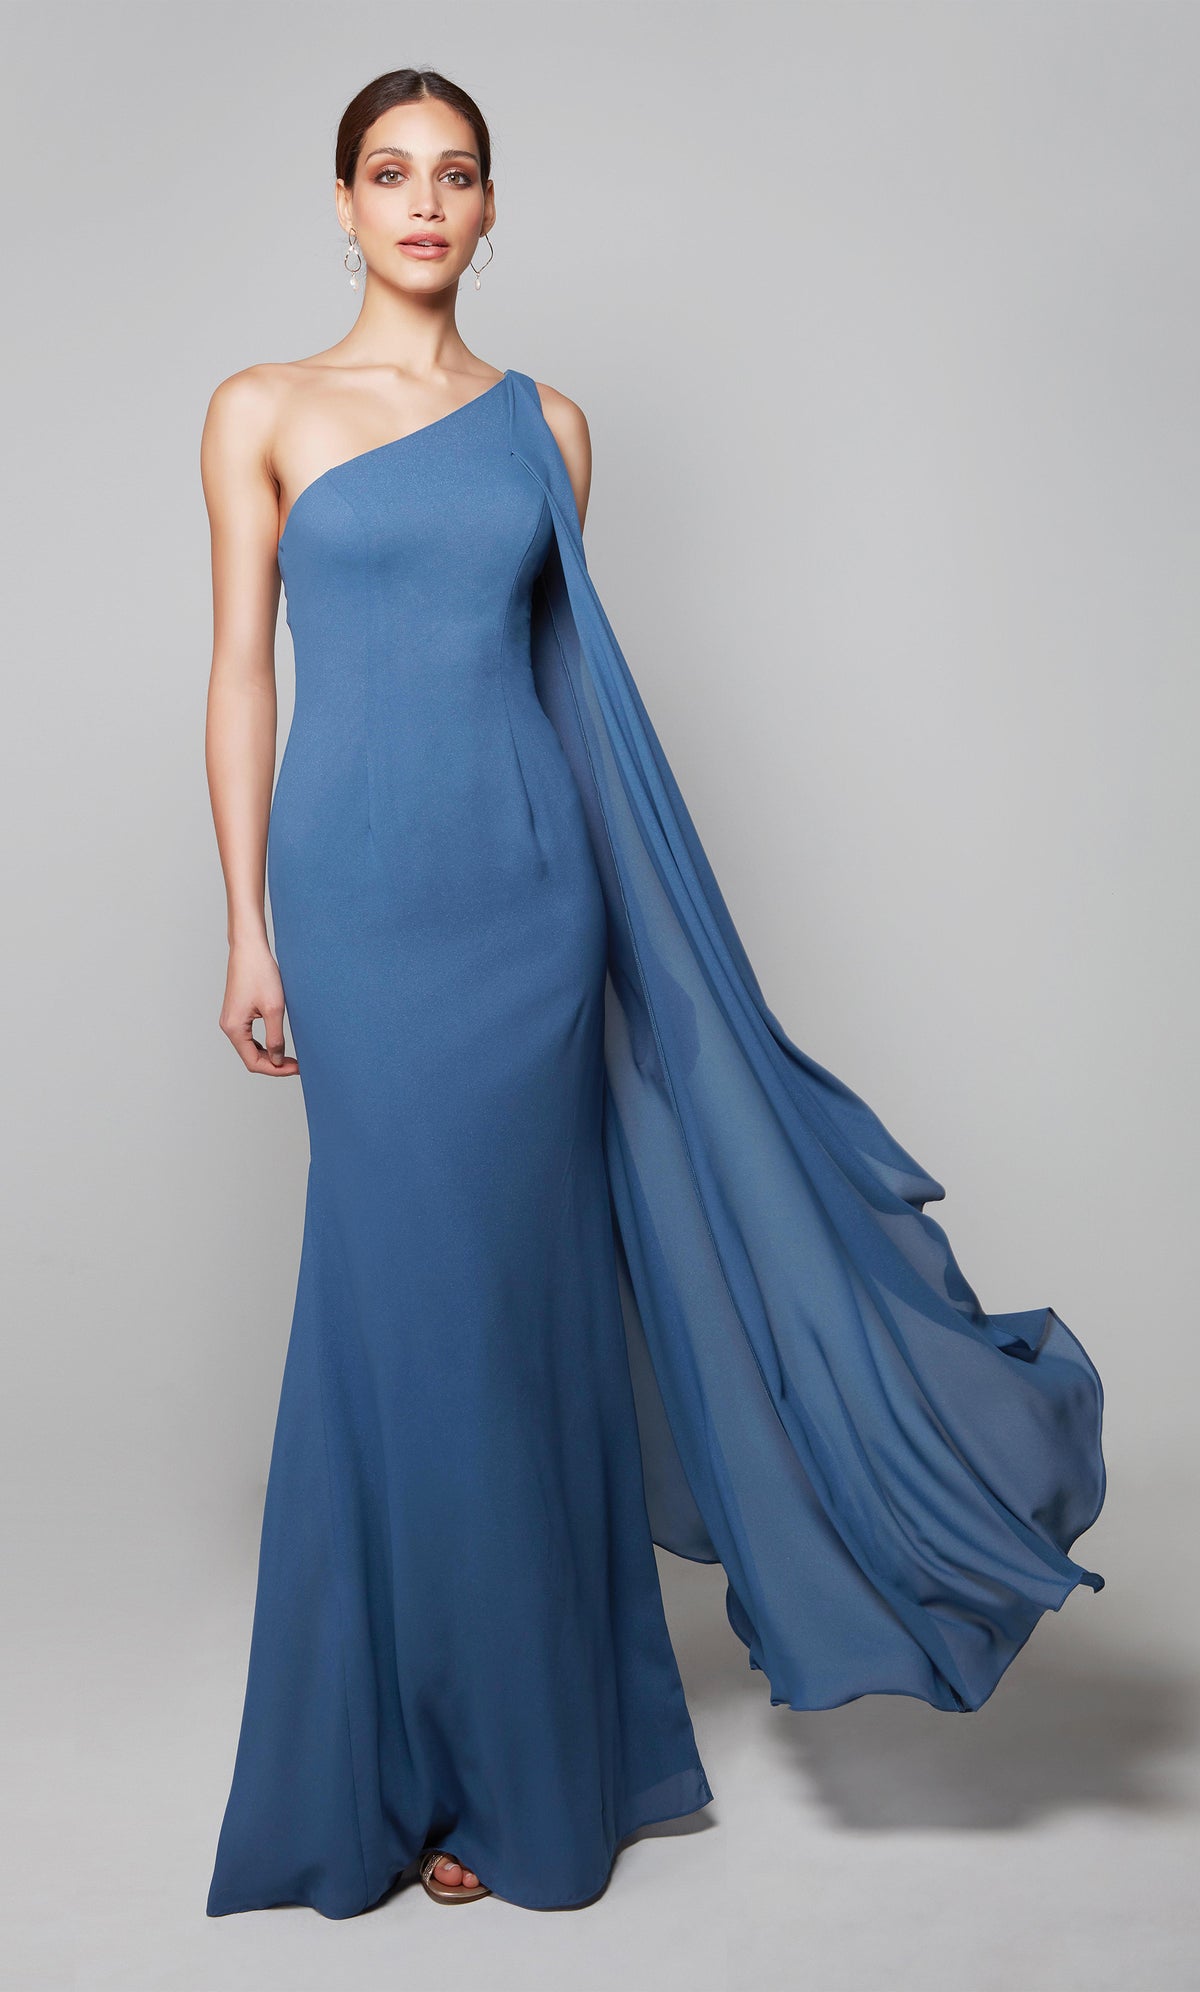 Elegant wedding guest dress with a one shoulder neckline and a wrap hem cape in blue.